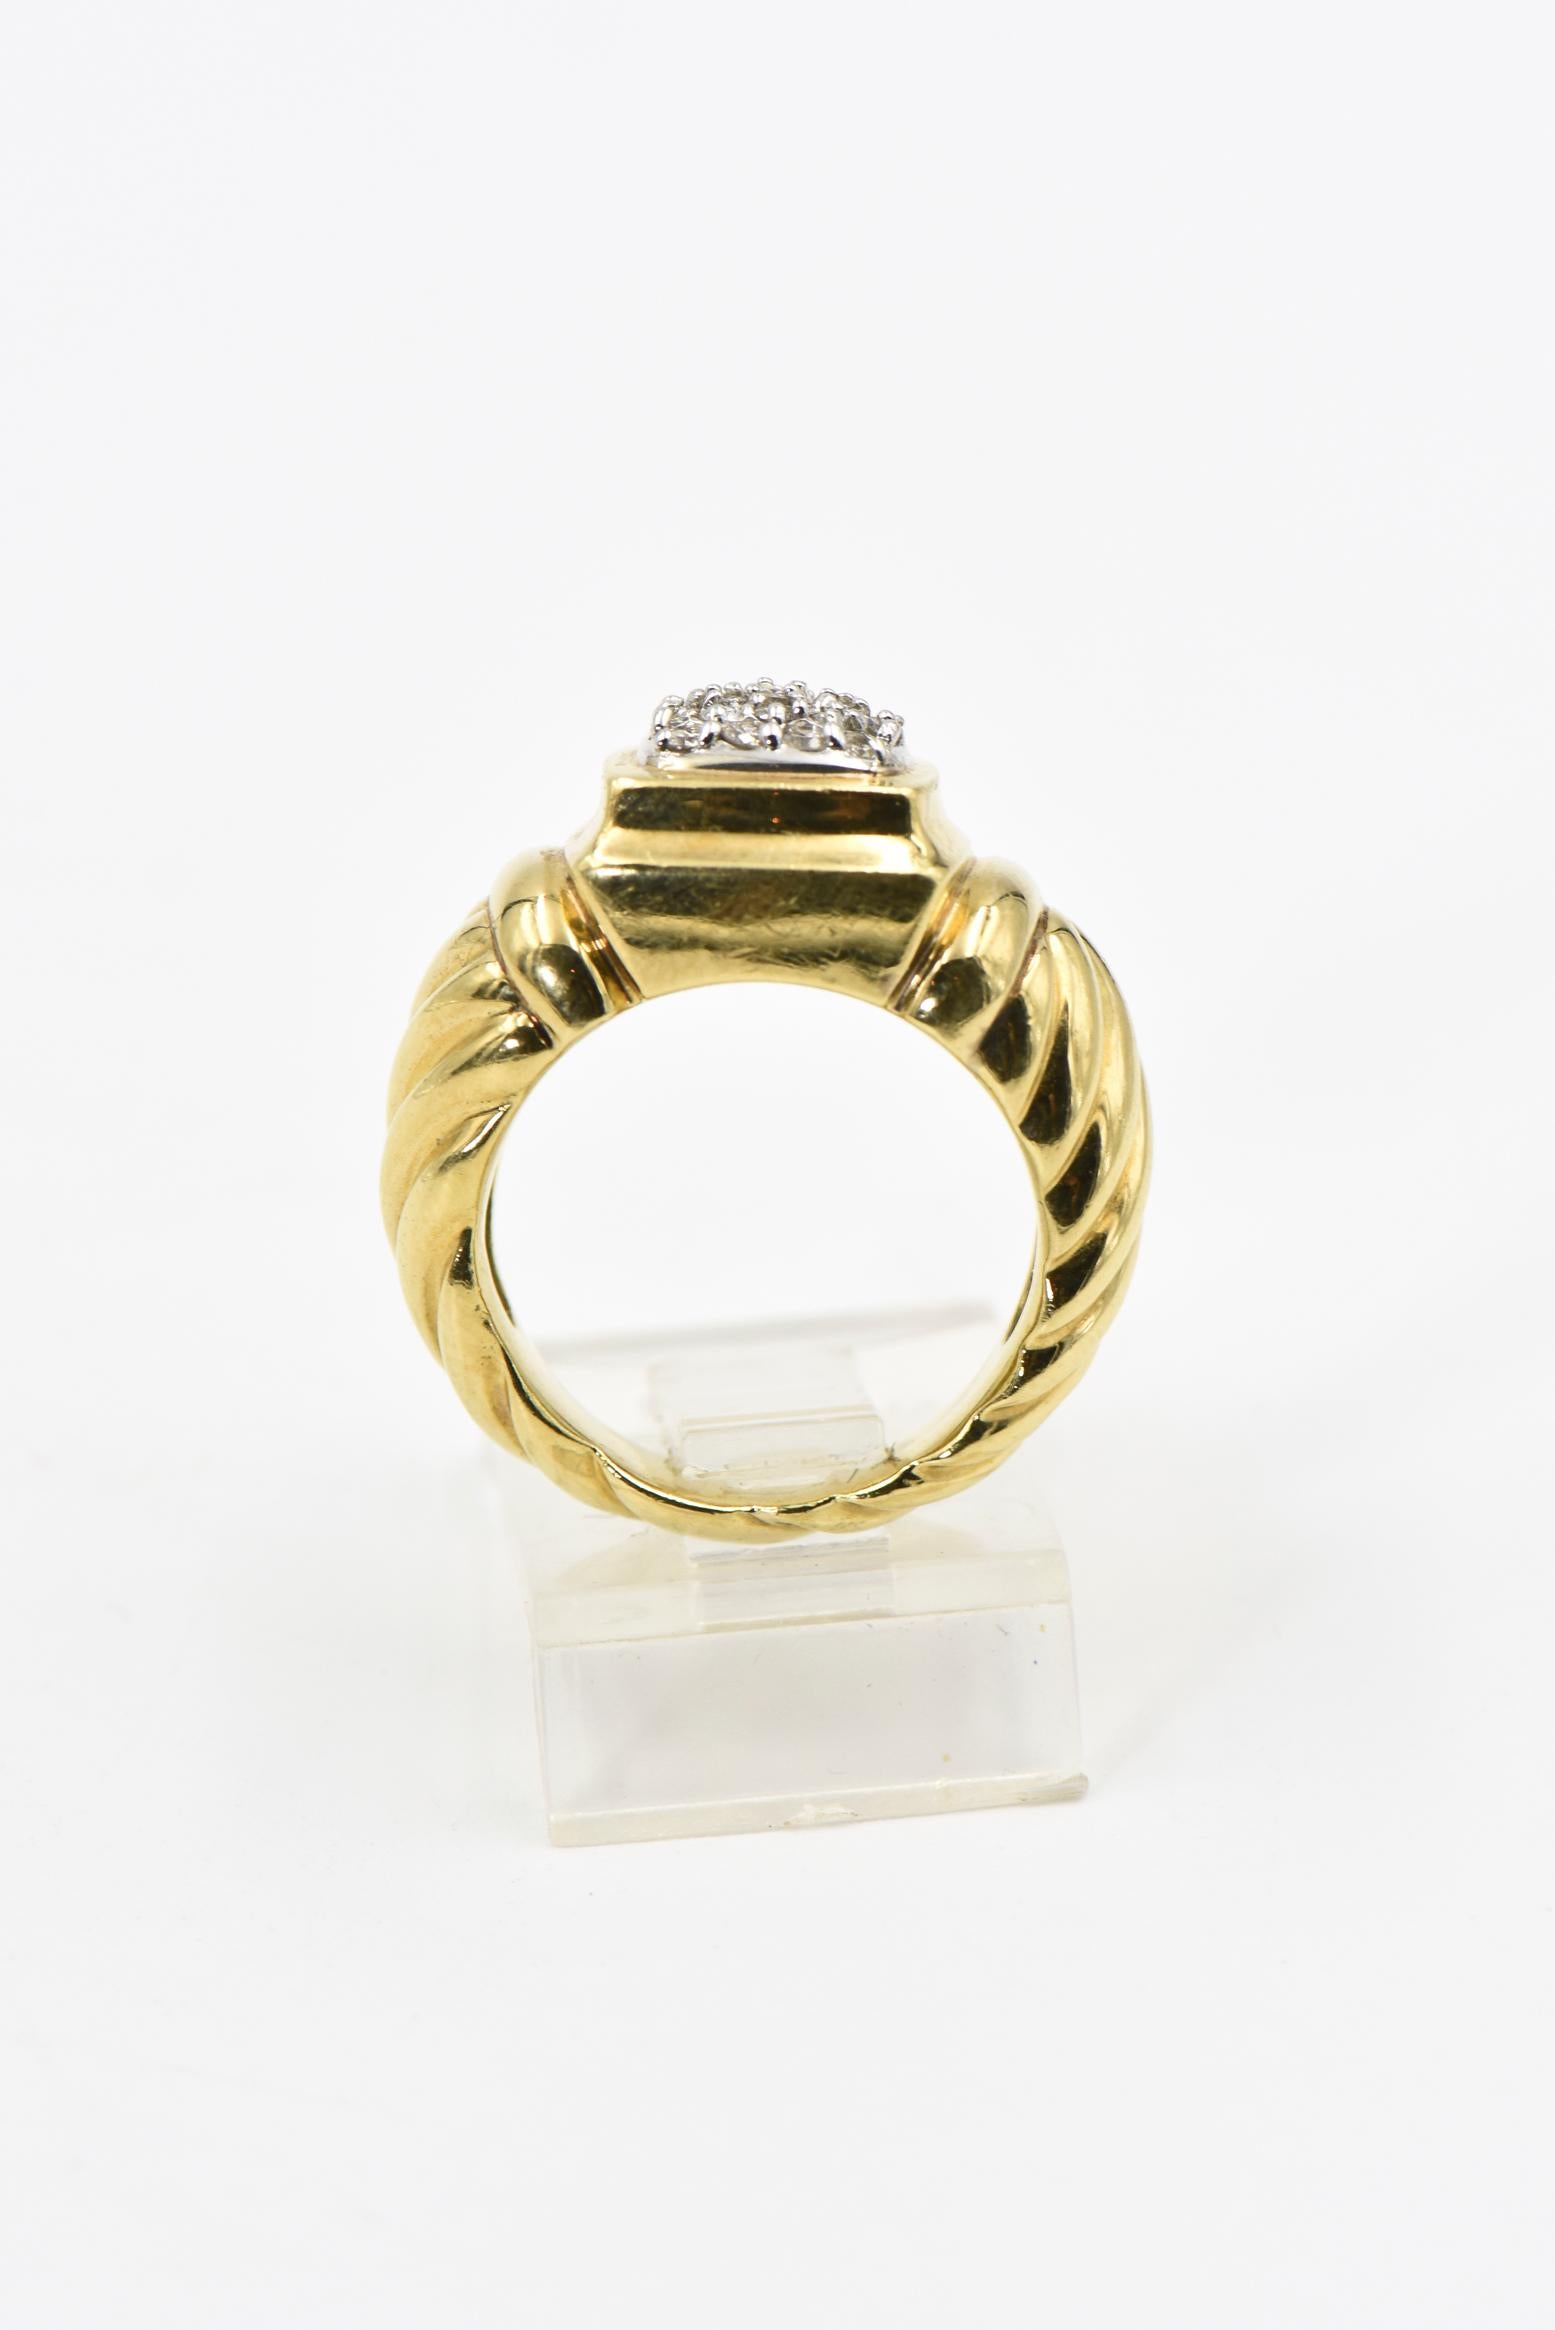 Yurman Diamond Gold Cable Band Ring In Good Condition For Sale In Miami Beach, FL